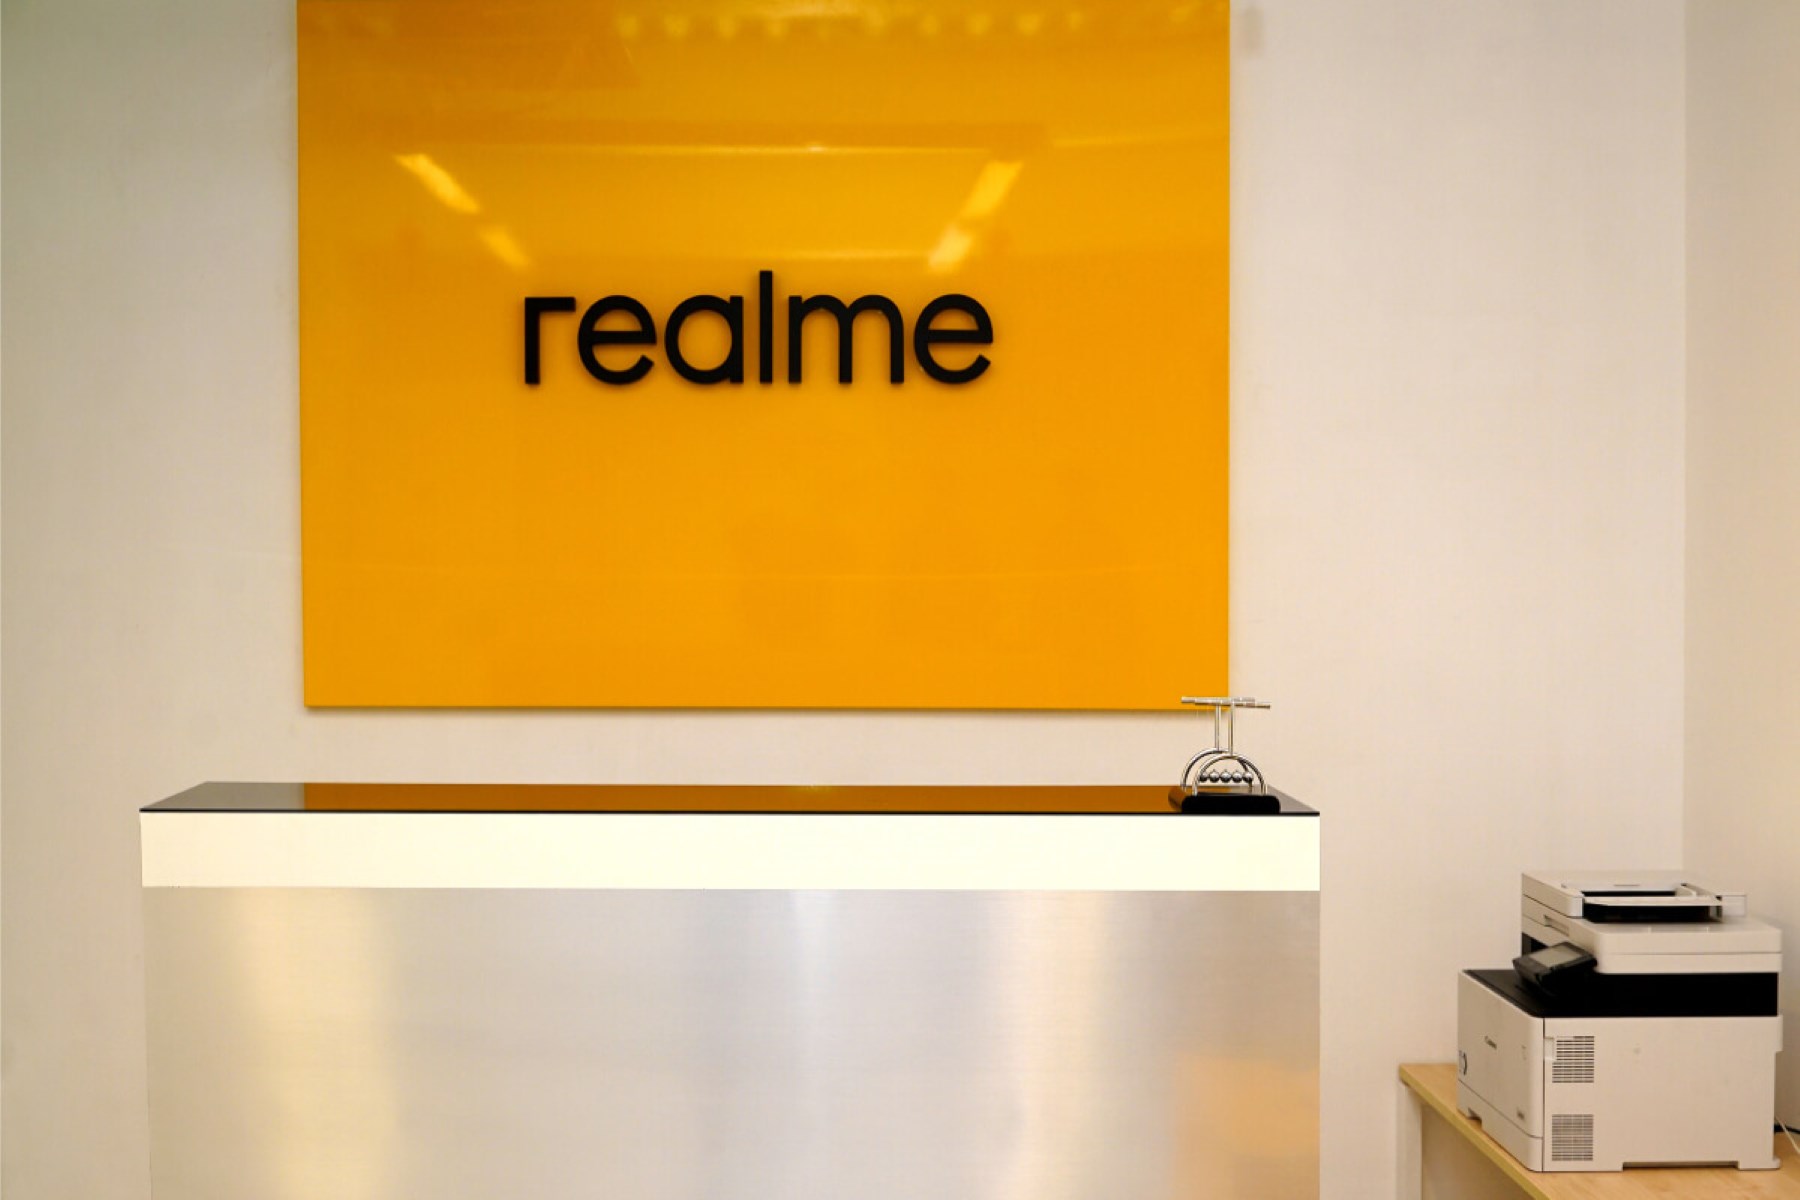 ownership-of-realme-a-quick-overview